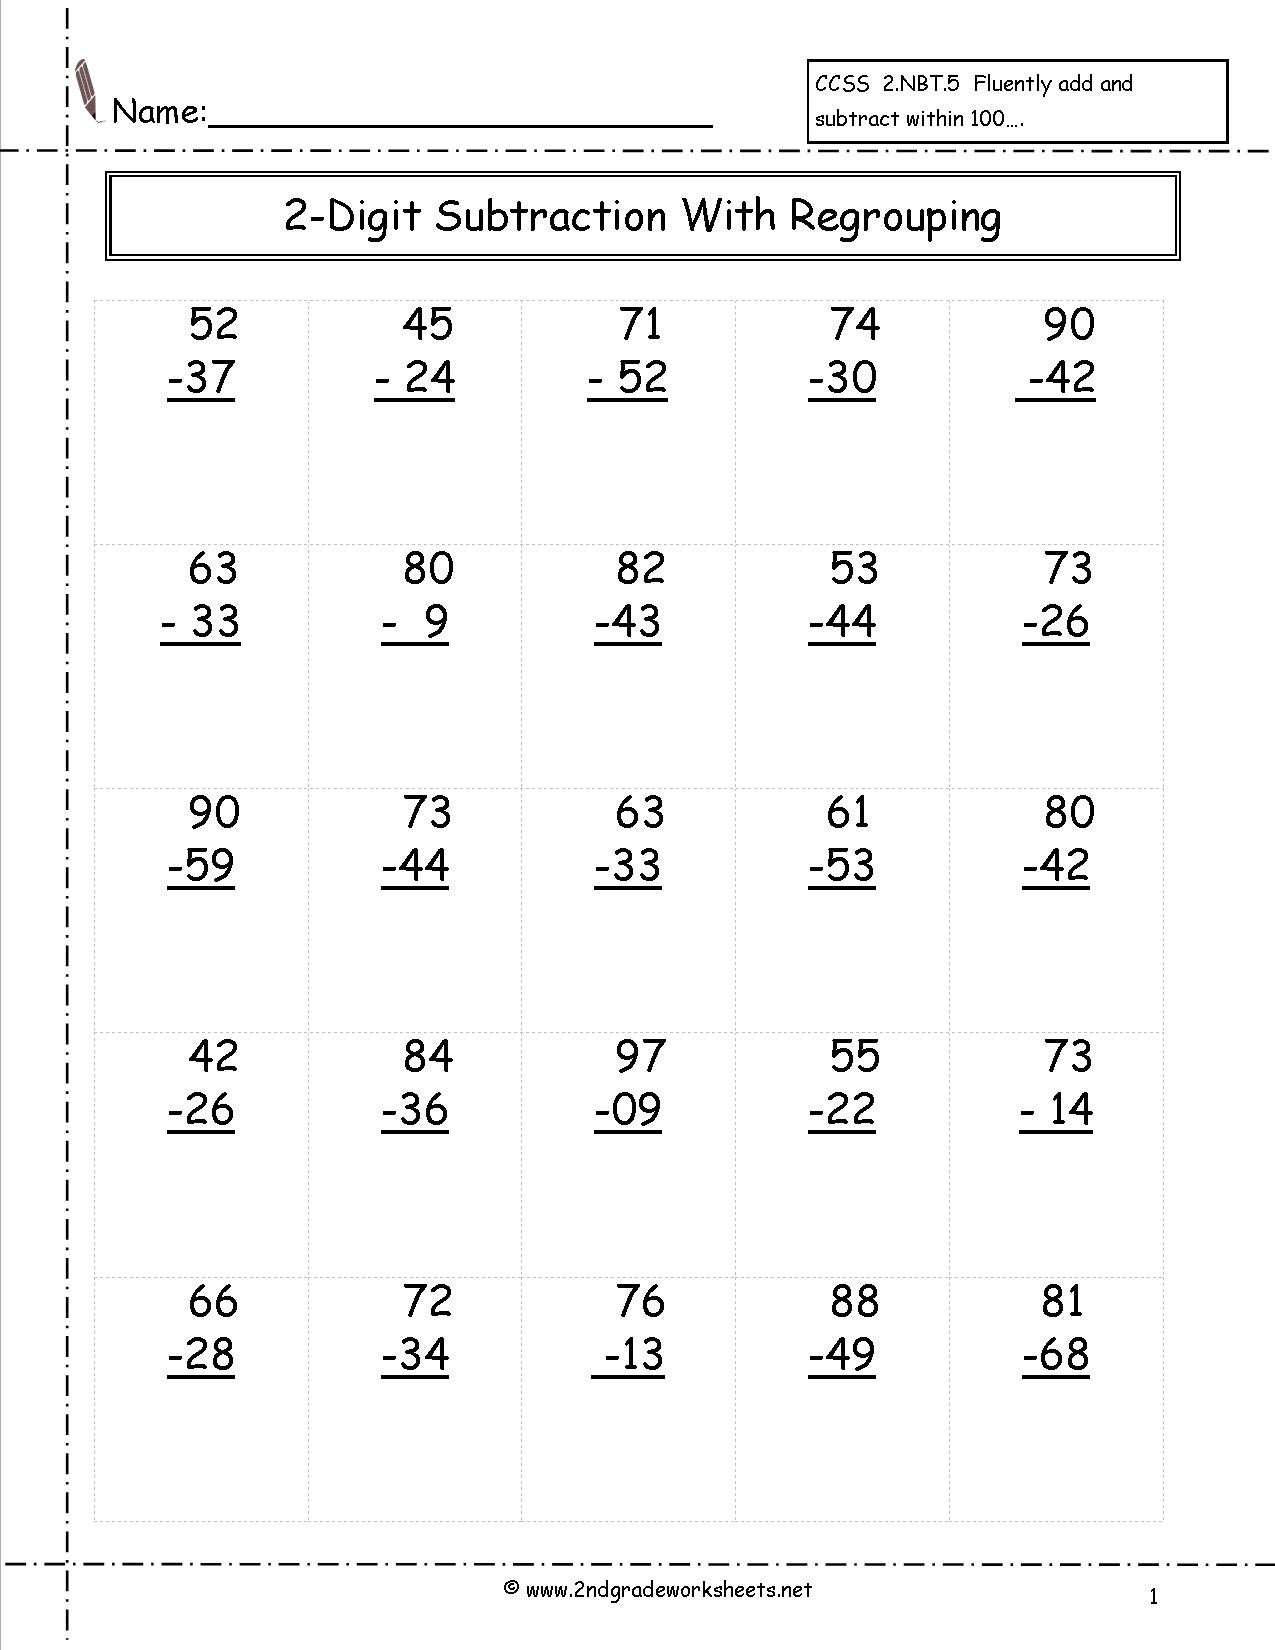 4 Free Math Worksheets First Grade 1 Subtraction Subtract 1 Digit From 2 Digit No Regrouping AMP